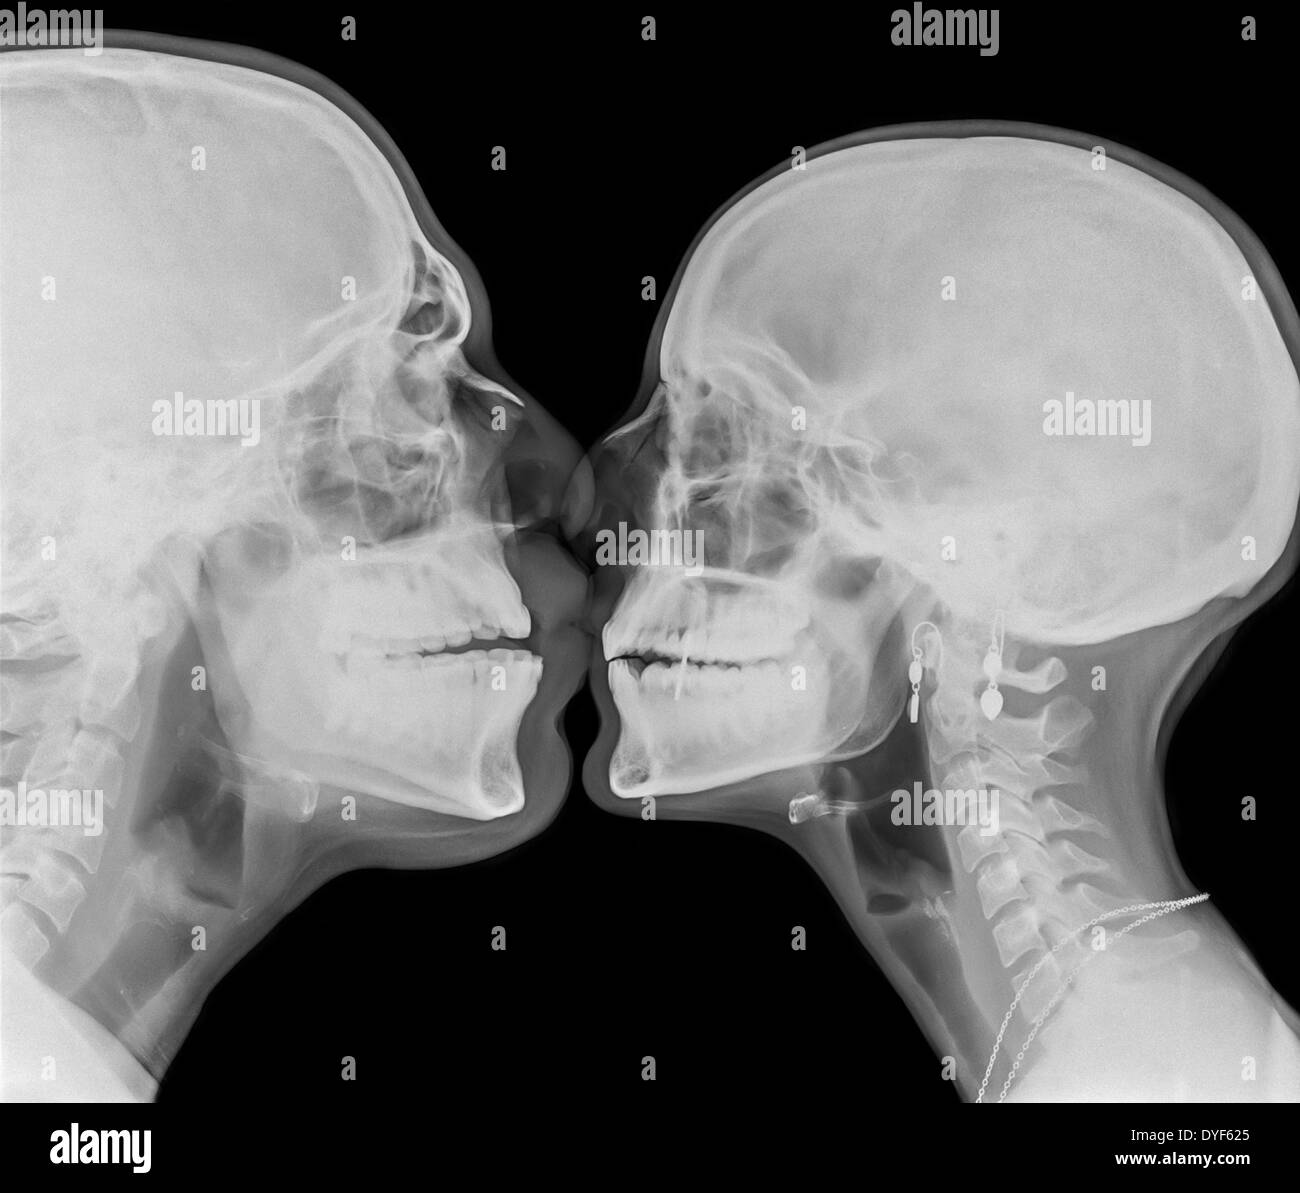 Kissing Couple. Two people kissing under x-ray Stock Photo